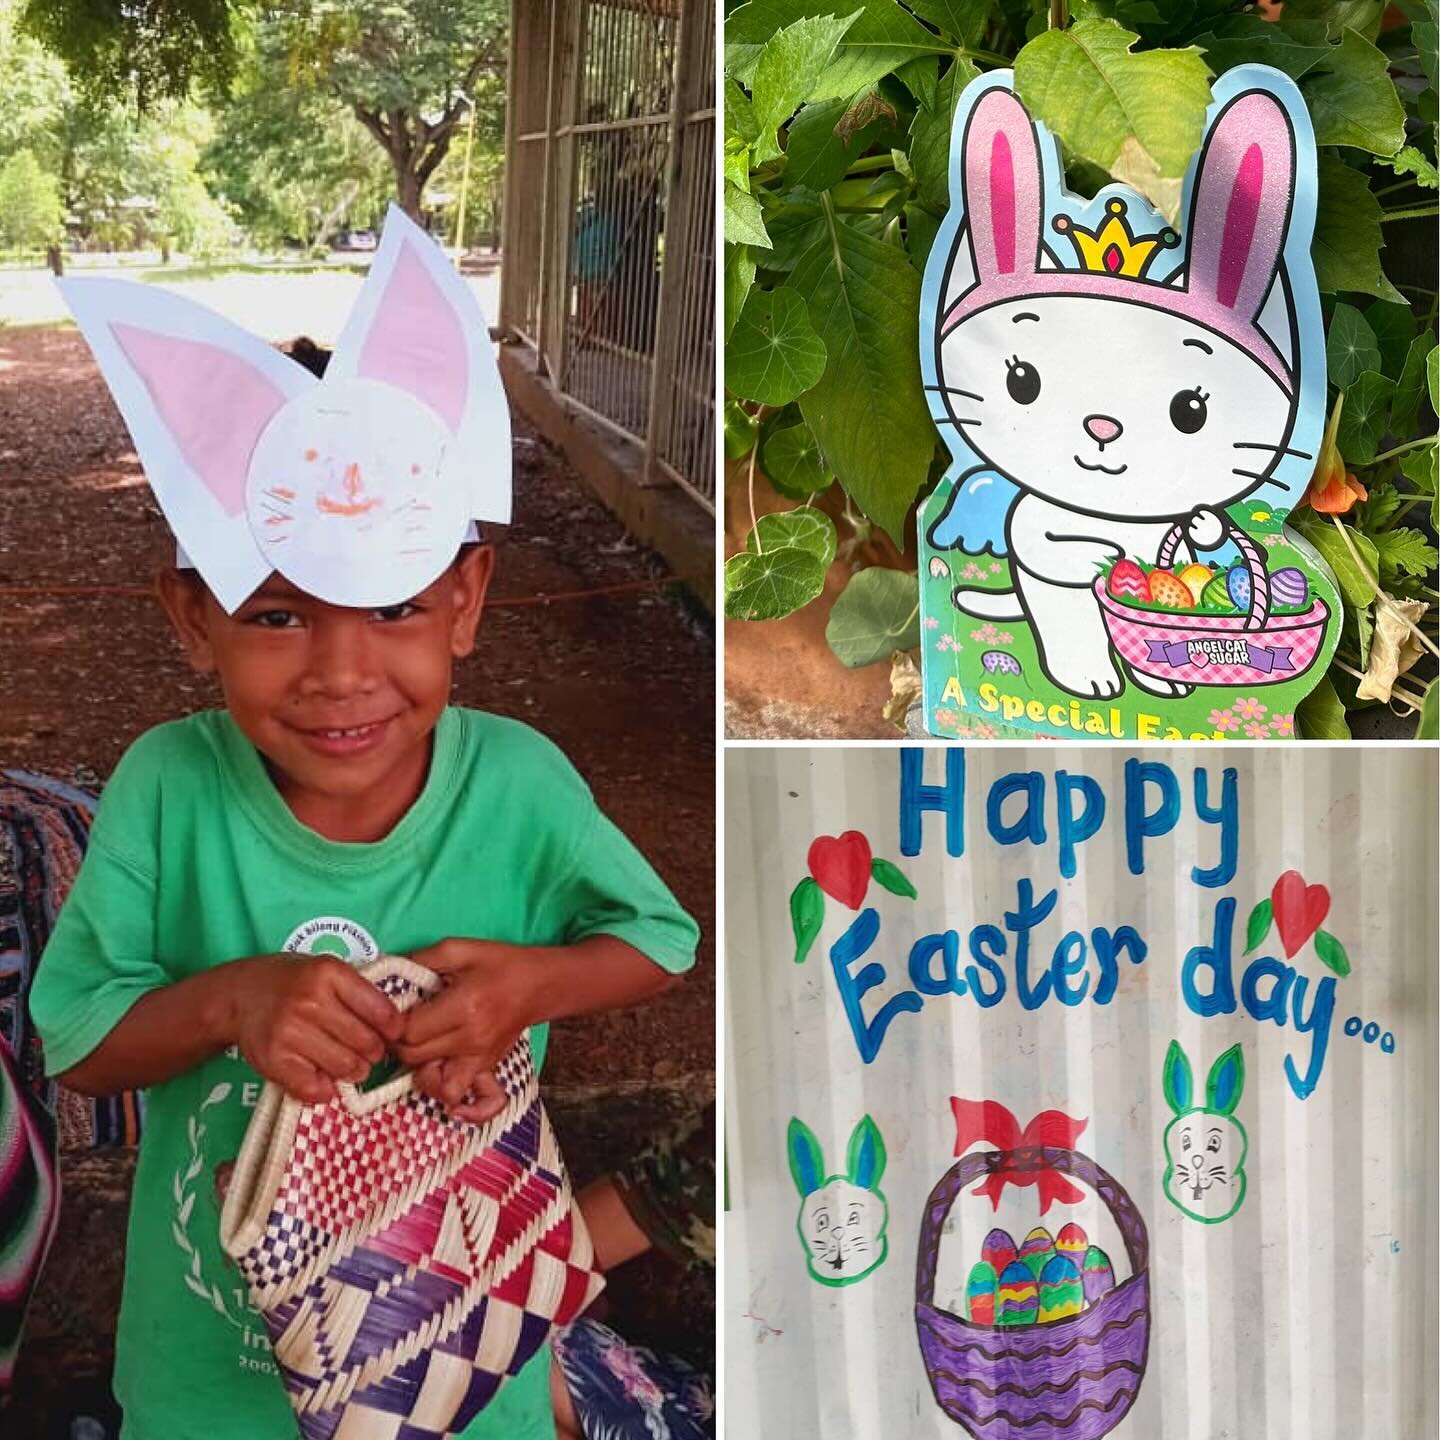 🐰🐣🌸Our Easter bunnies are wishing you all a Happy and safe Easter! 🐣🌸🐰#bukbilongpikinini #happyeastereveryone #happyeaster #papuanewguinea #earlychildhoodeducation #education #realeastereggs